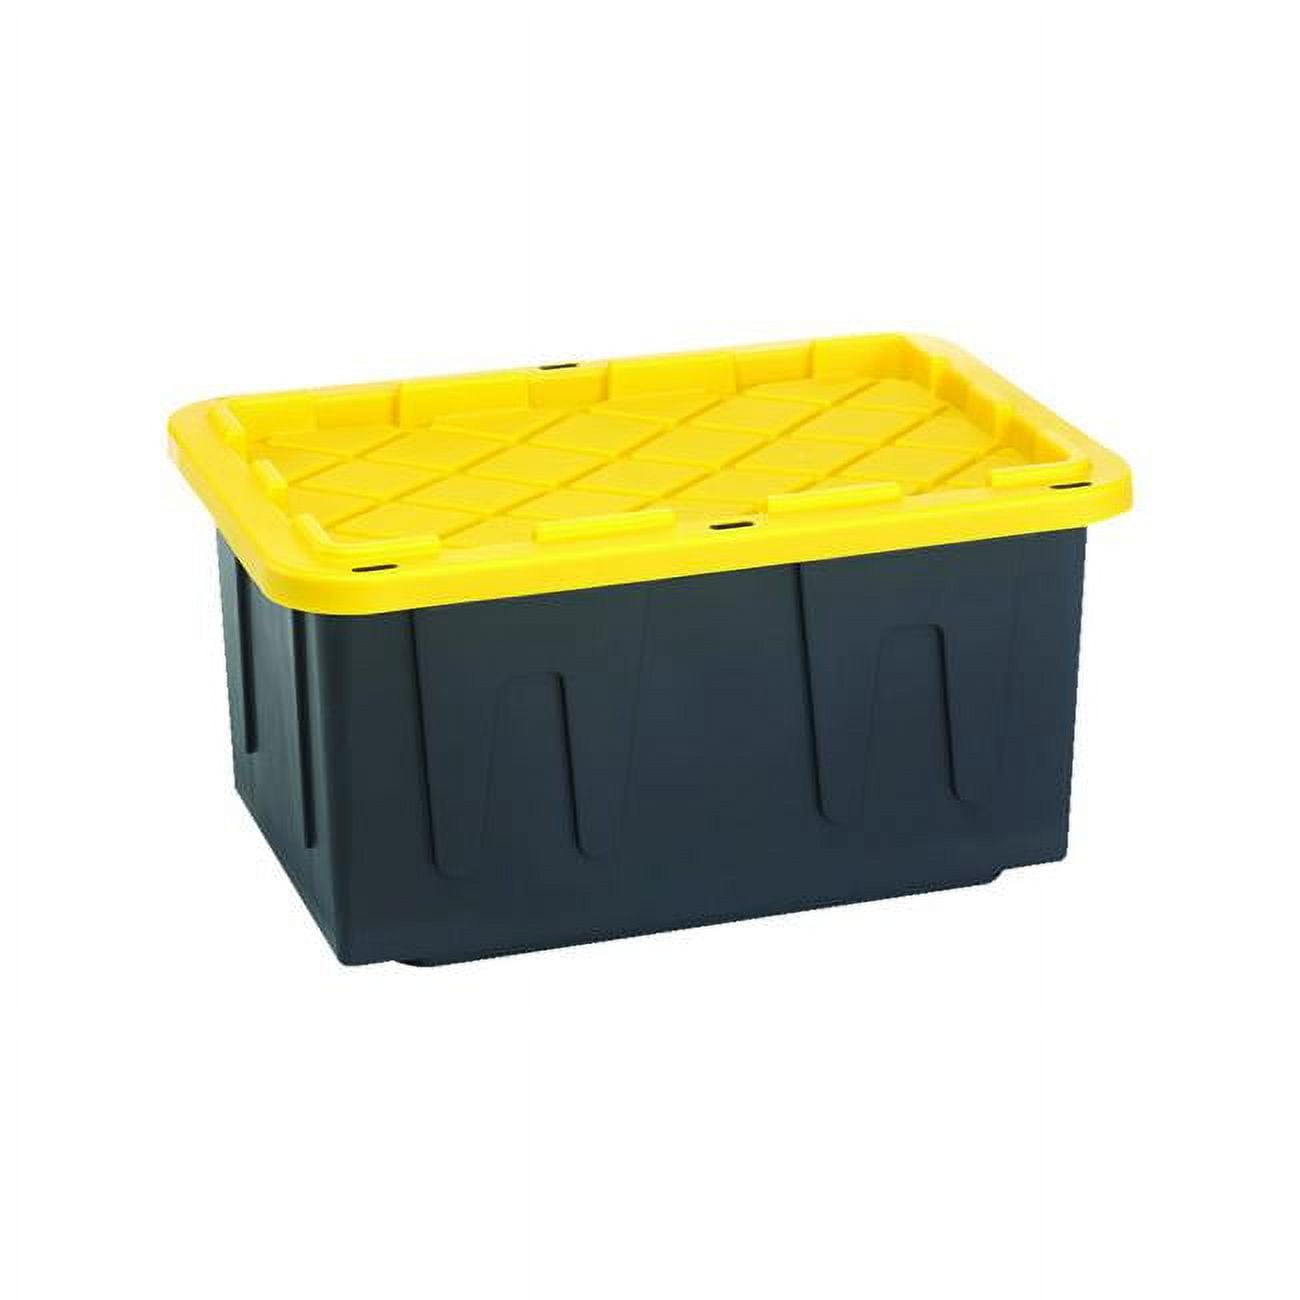 Office Depot Brand by GreenMade Professional Storage Tote With HandlesSnap Lid  27 Gallon 30 110 x 20 14 x 14 34 BlackYellow - Office Depot